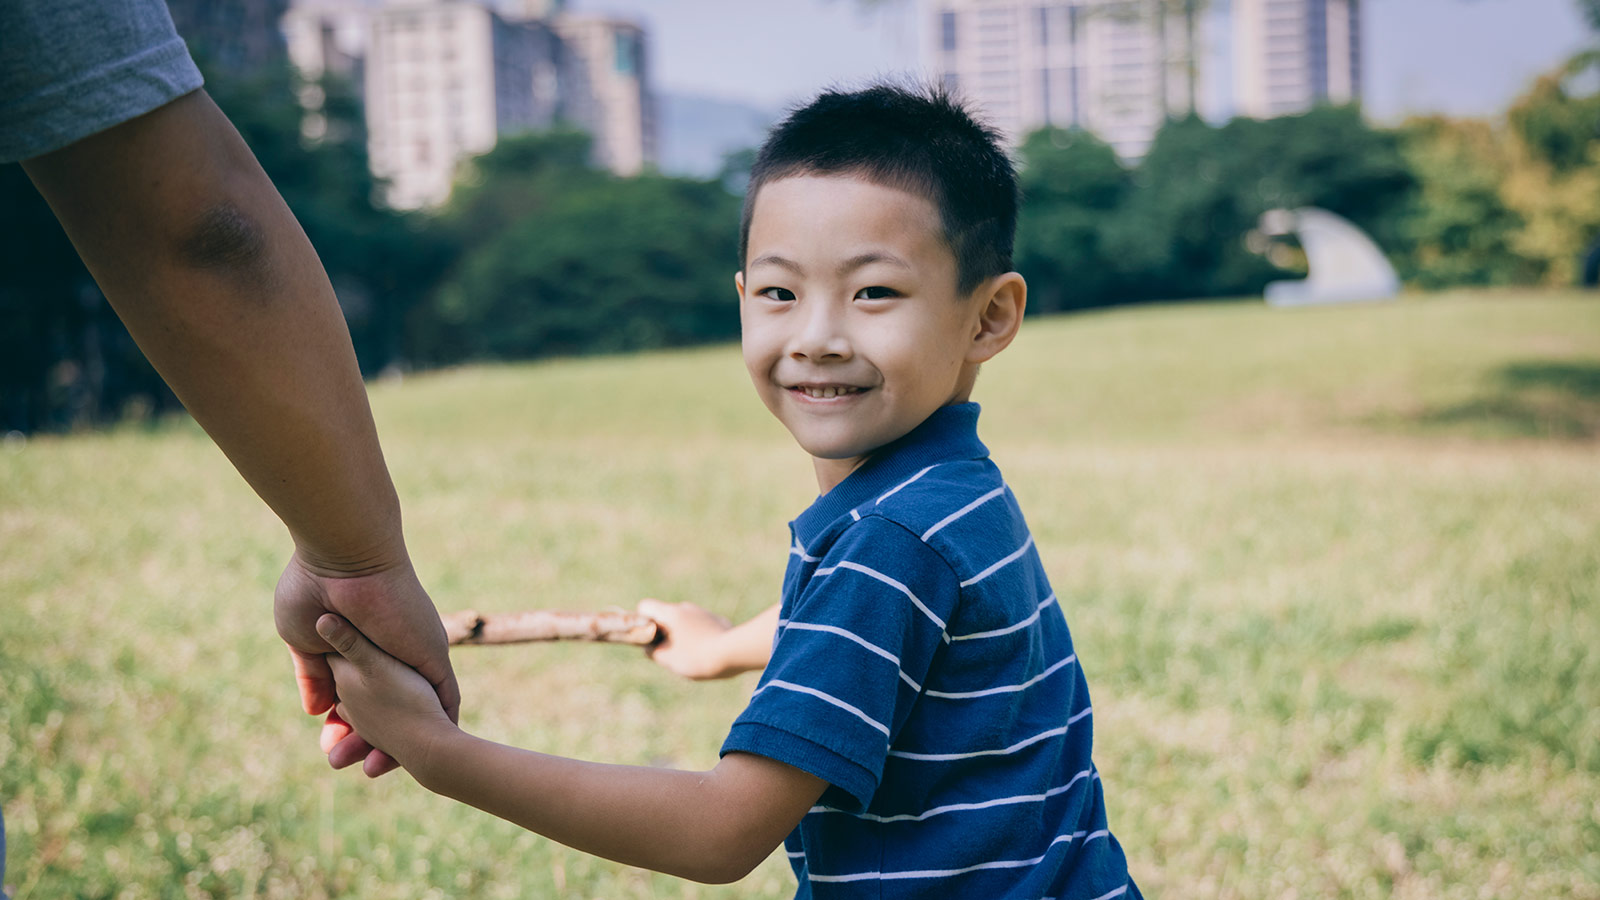 smiling child adopted from taiwan holding parent's hand in grassy park